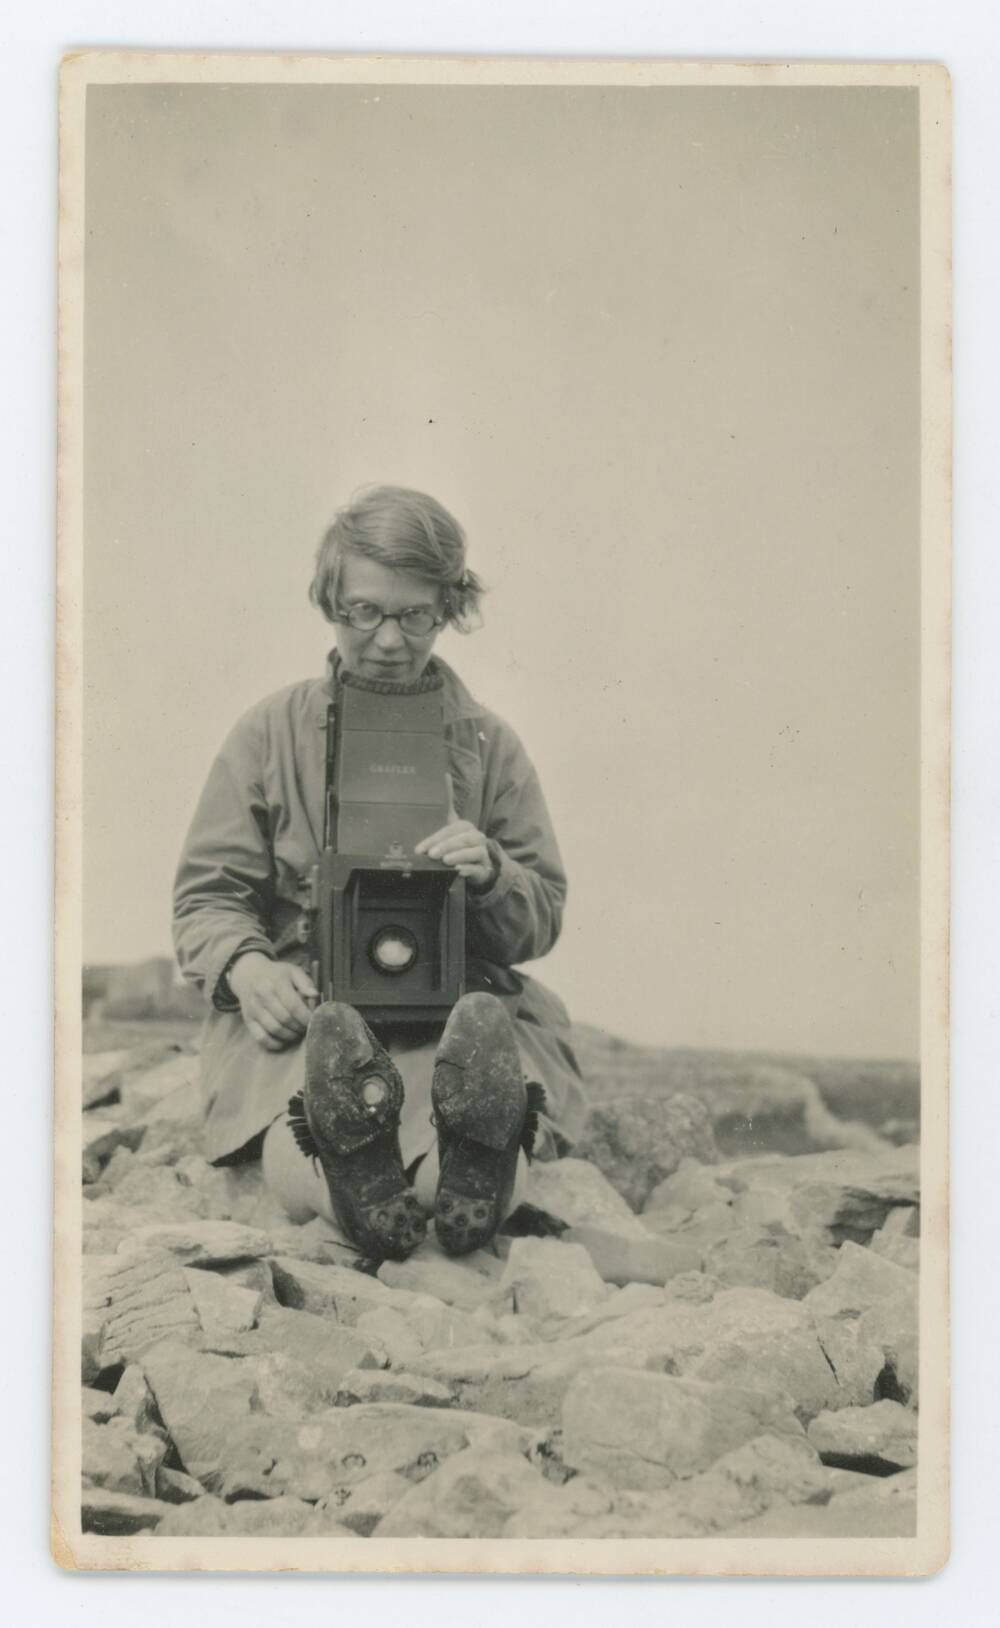 A black and white photo of a woman sitting on a rocky beach with her boot soles facing us. She holds a camera on her lap.